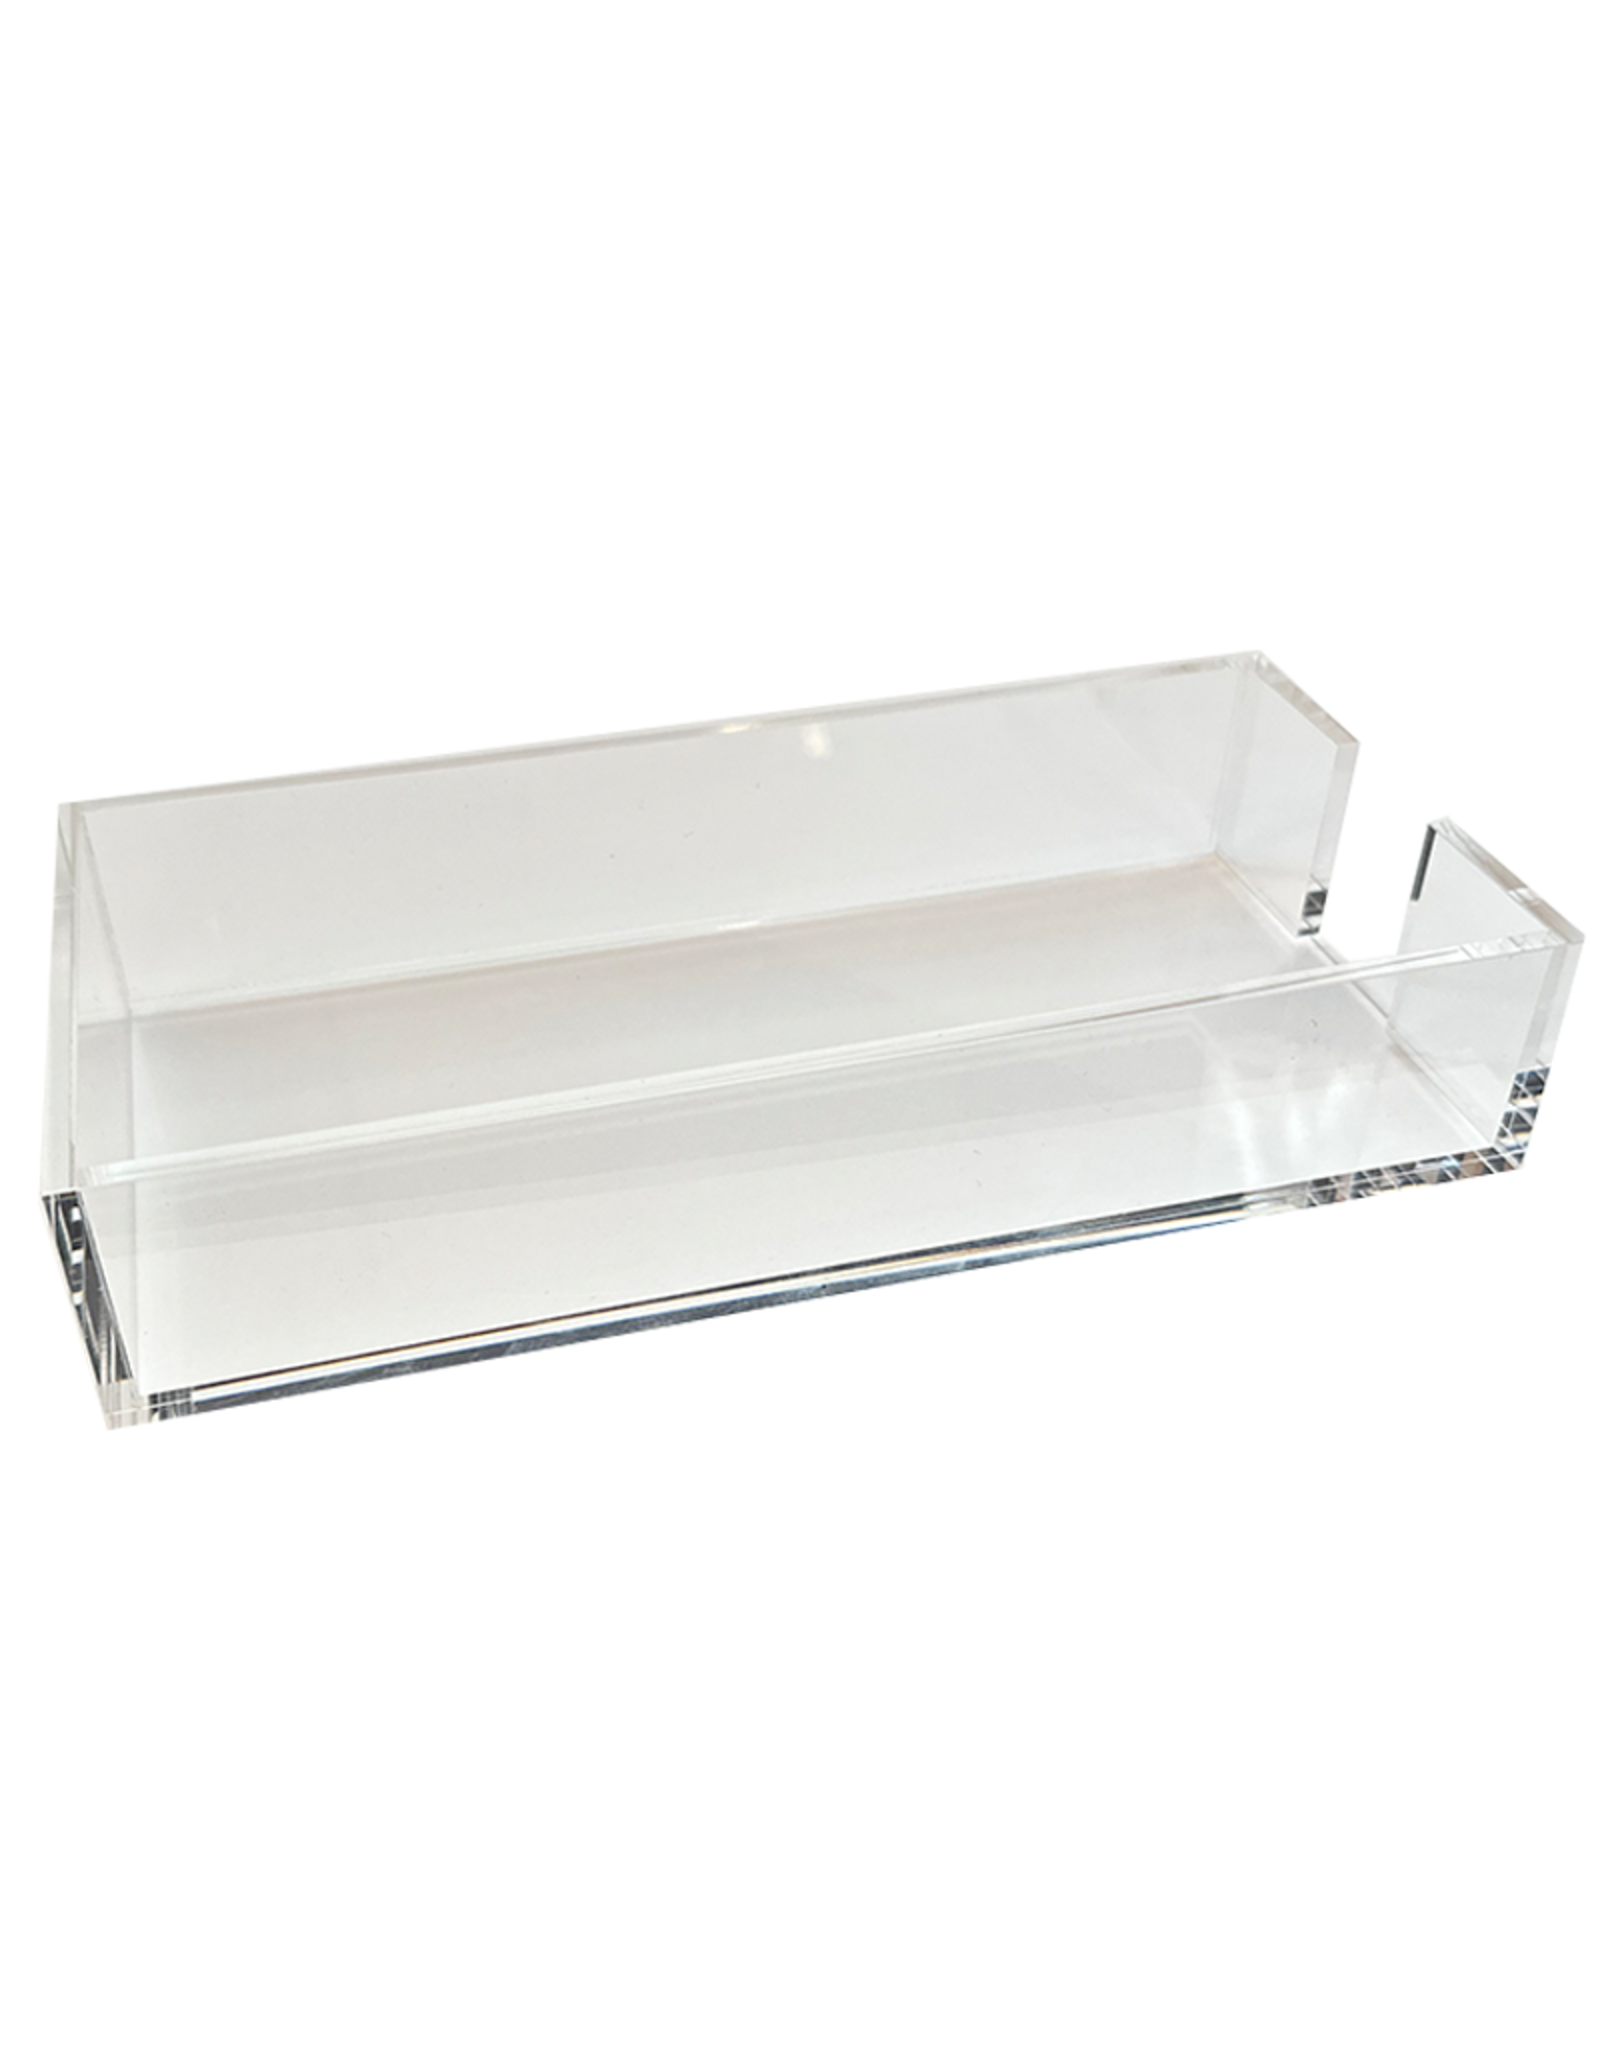 Black Ink Lucite Trays Buck Tray Holder 4x9 Buck Notepads